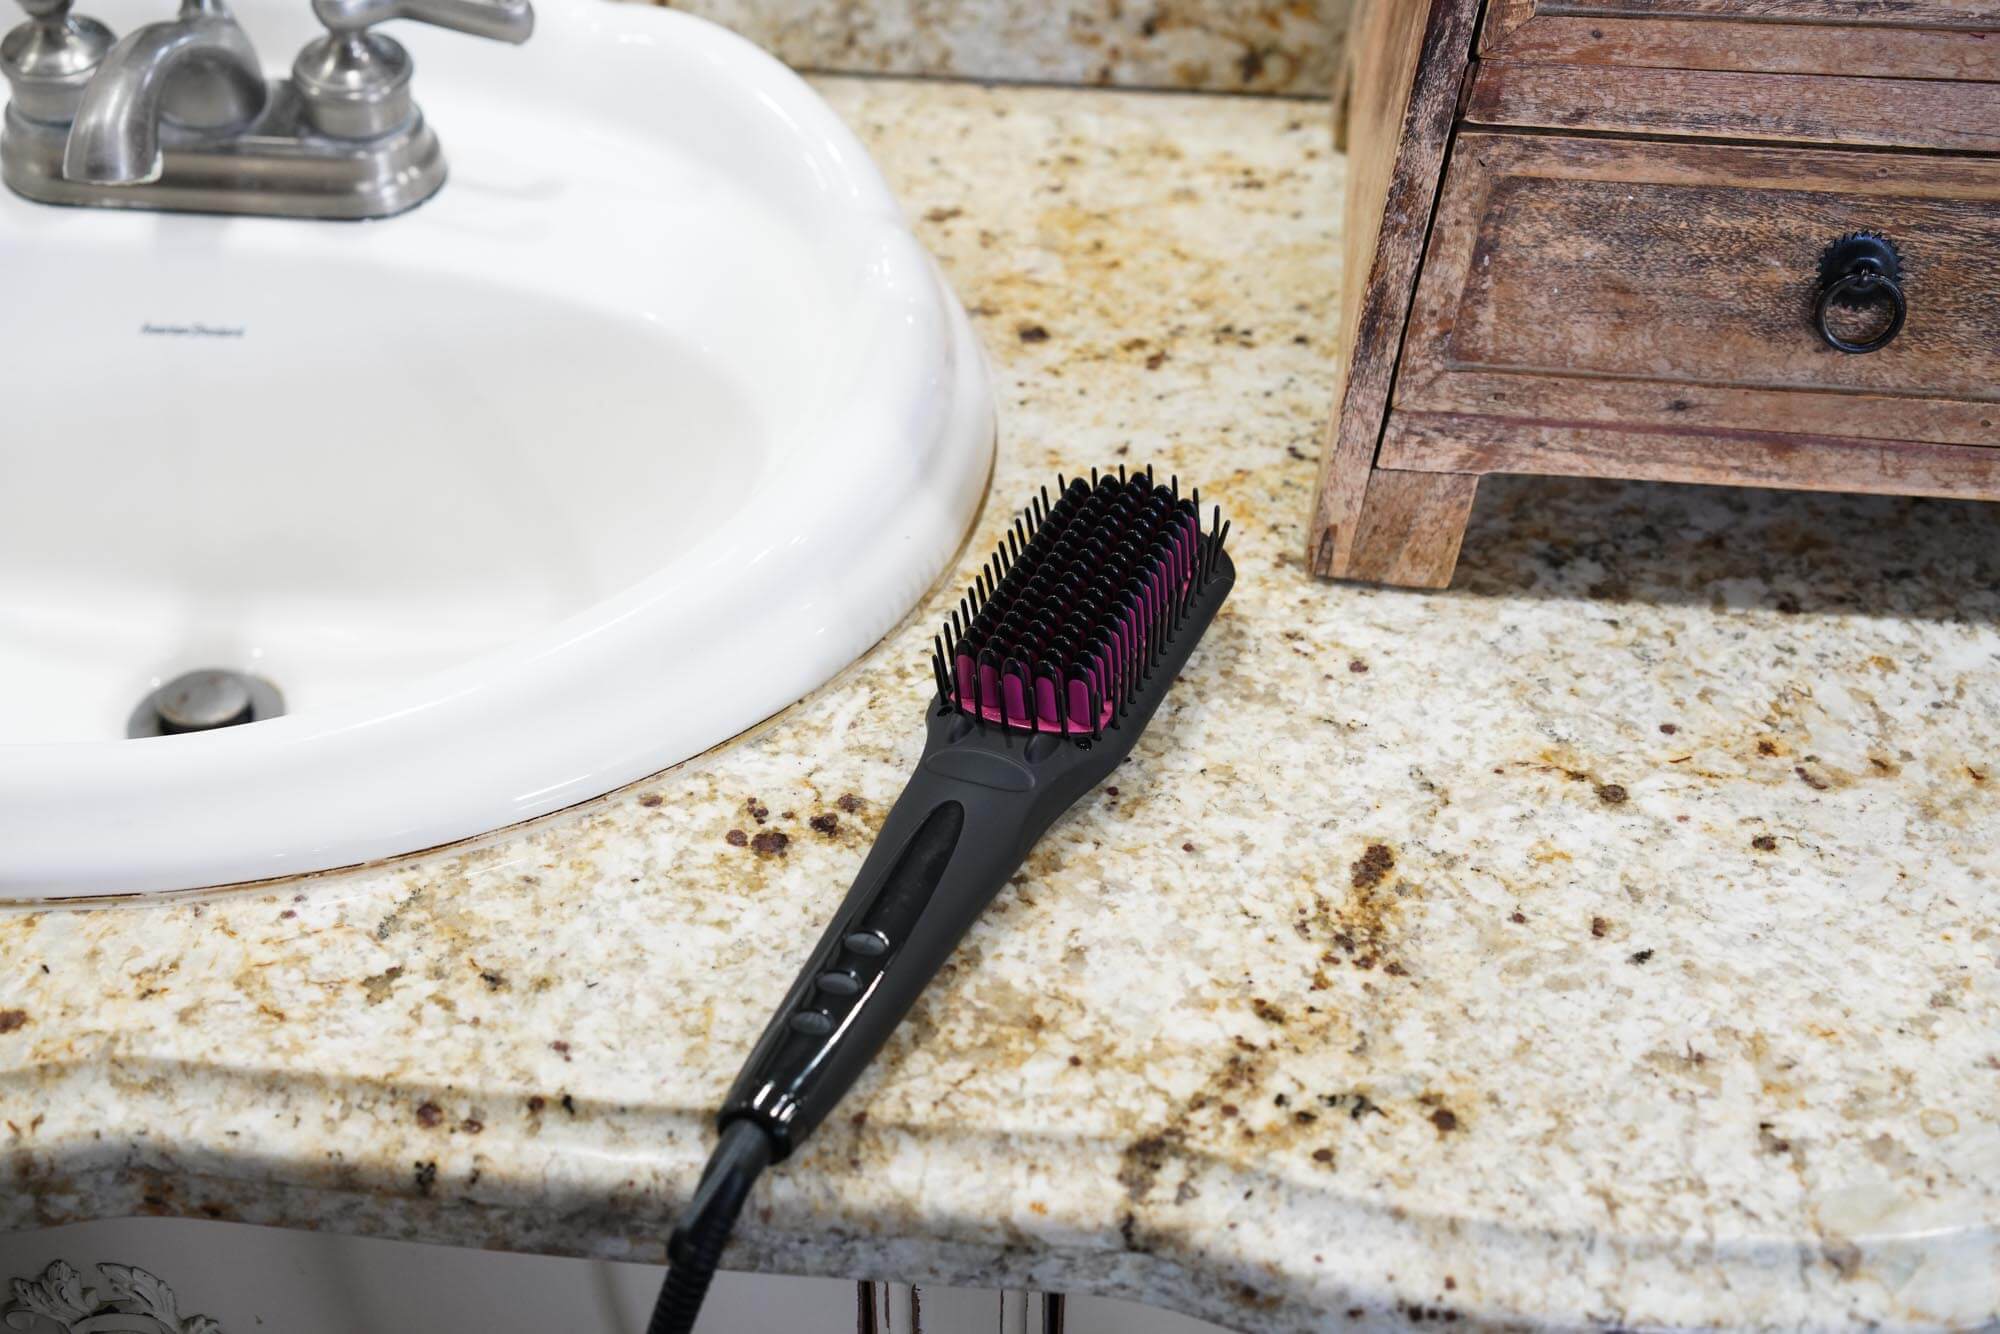 The 8 Best Hair Straightening Brushes of 2023 - Reviews by YBD